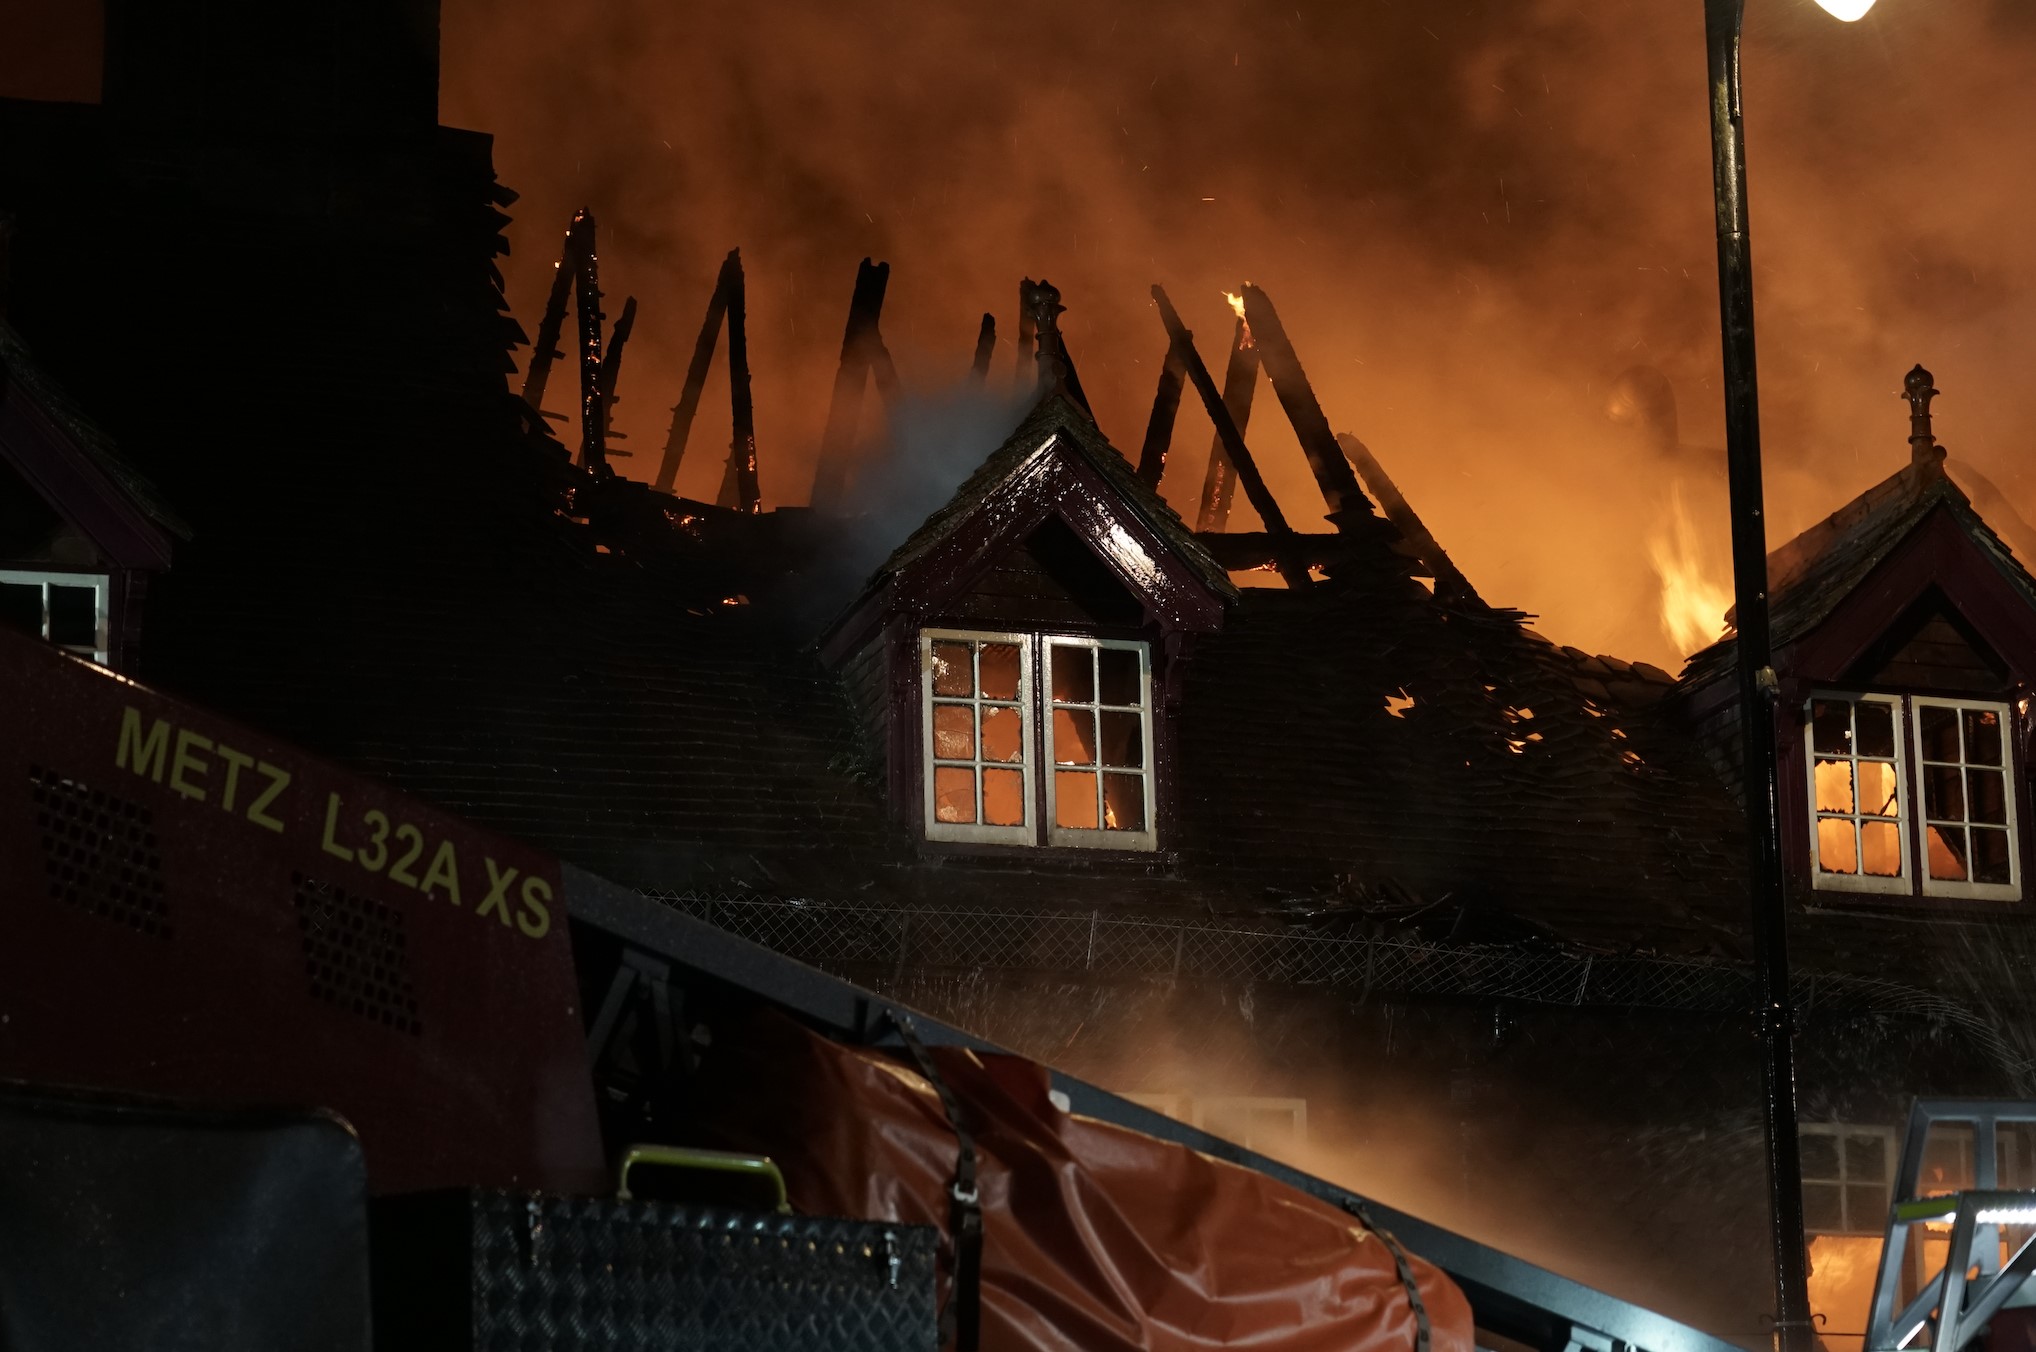 Fire has destroyed several buildings on North Street in Midhurst, West Sussex in the ealry hours of Thursday morning, March 16 2023 Photo credit: Hilton Holloway